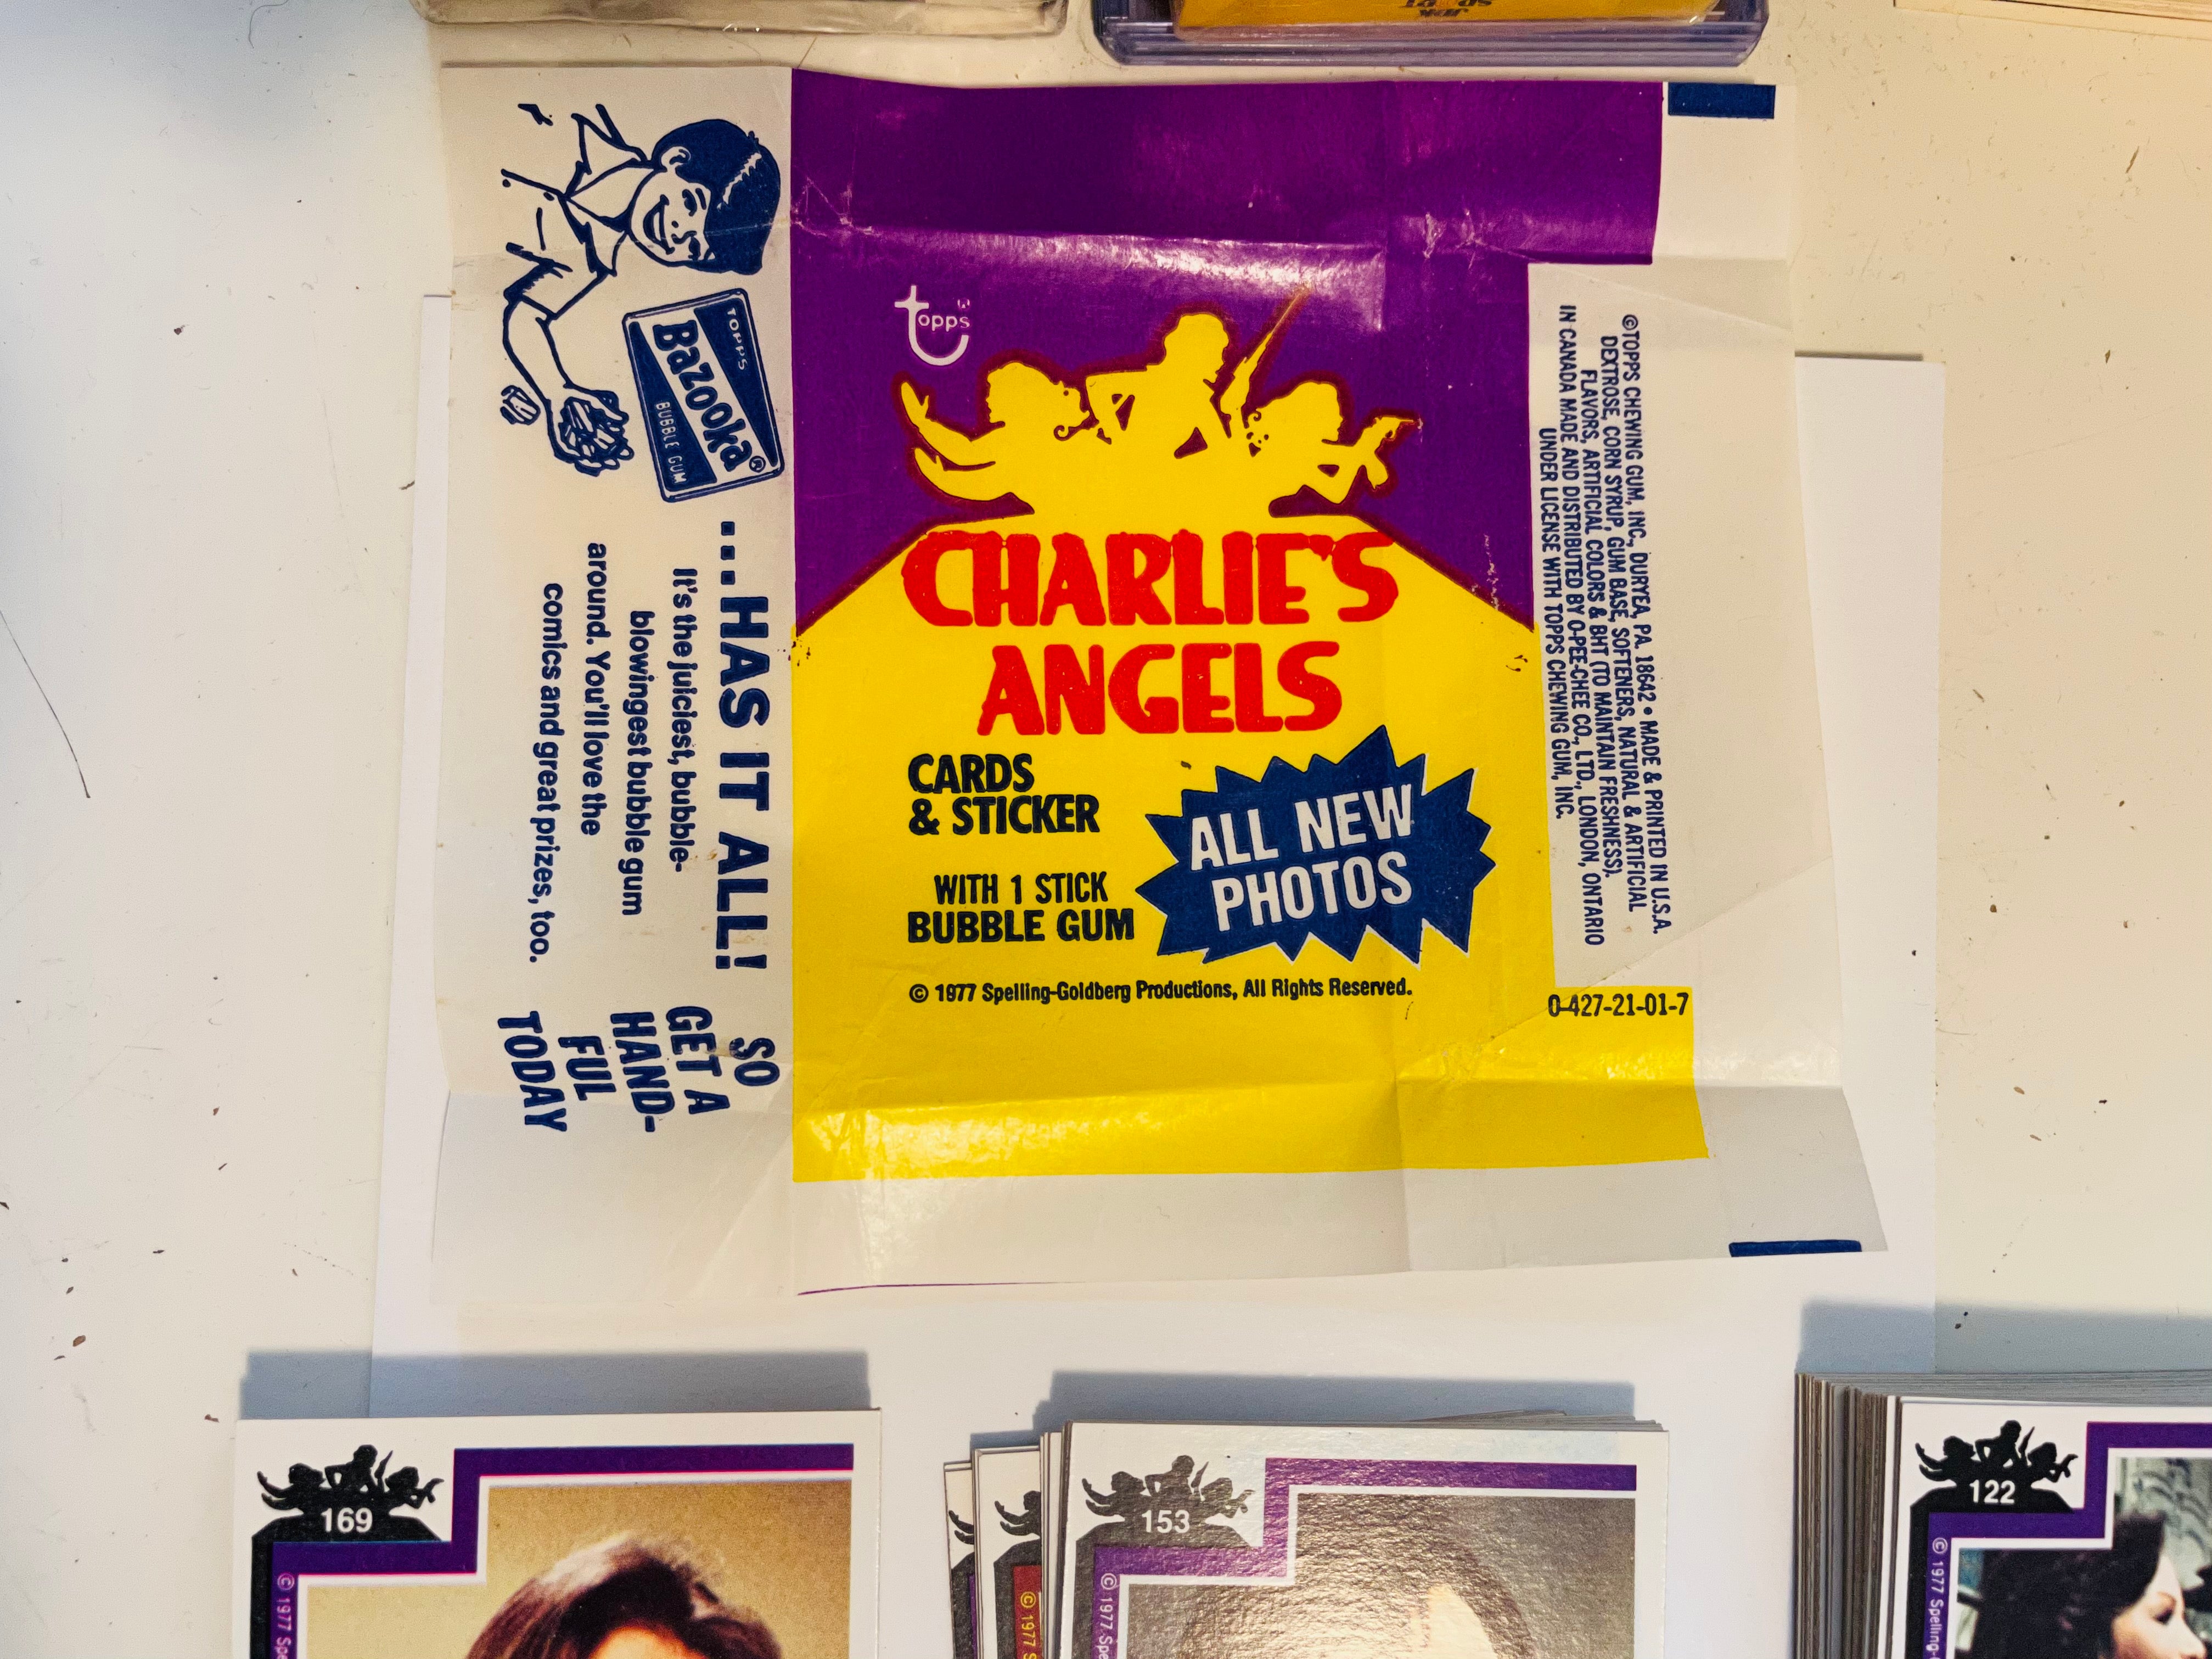 Charlie’s Angels Topps series 3 cards and stickers set with wrapper 1977